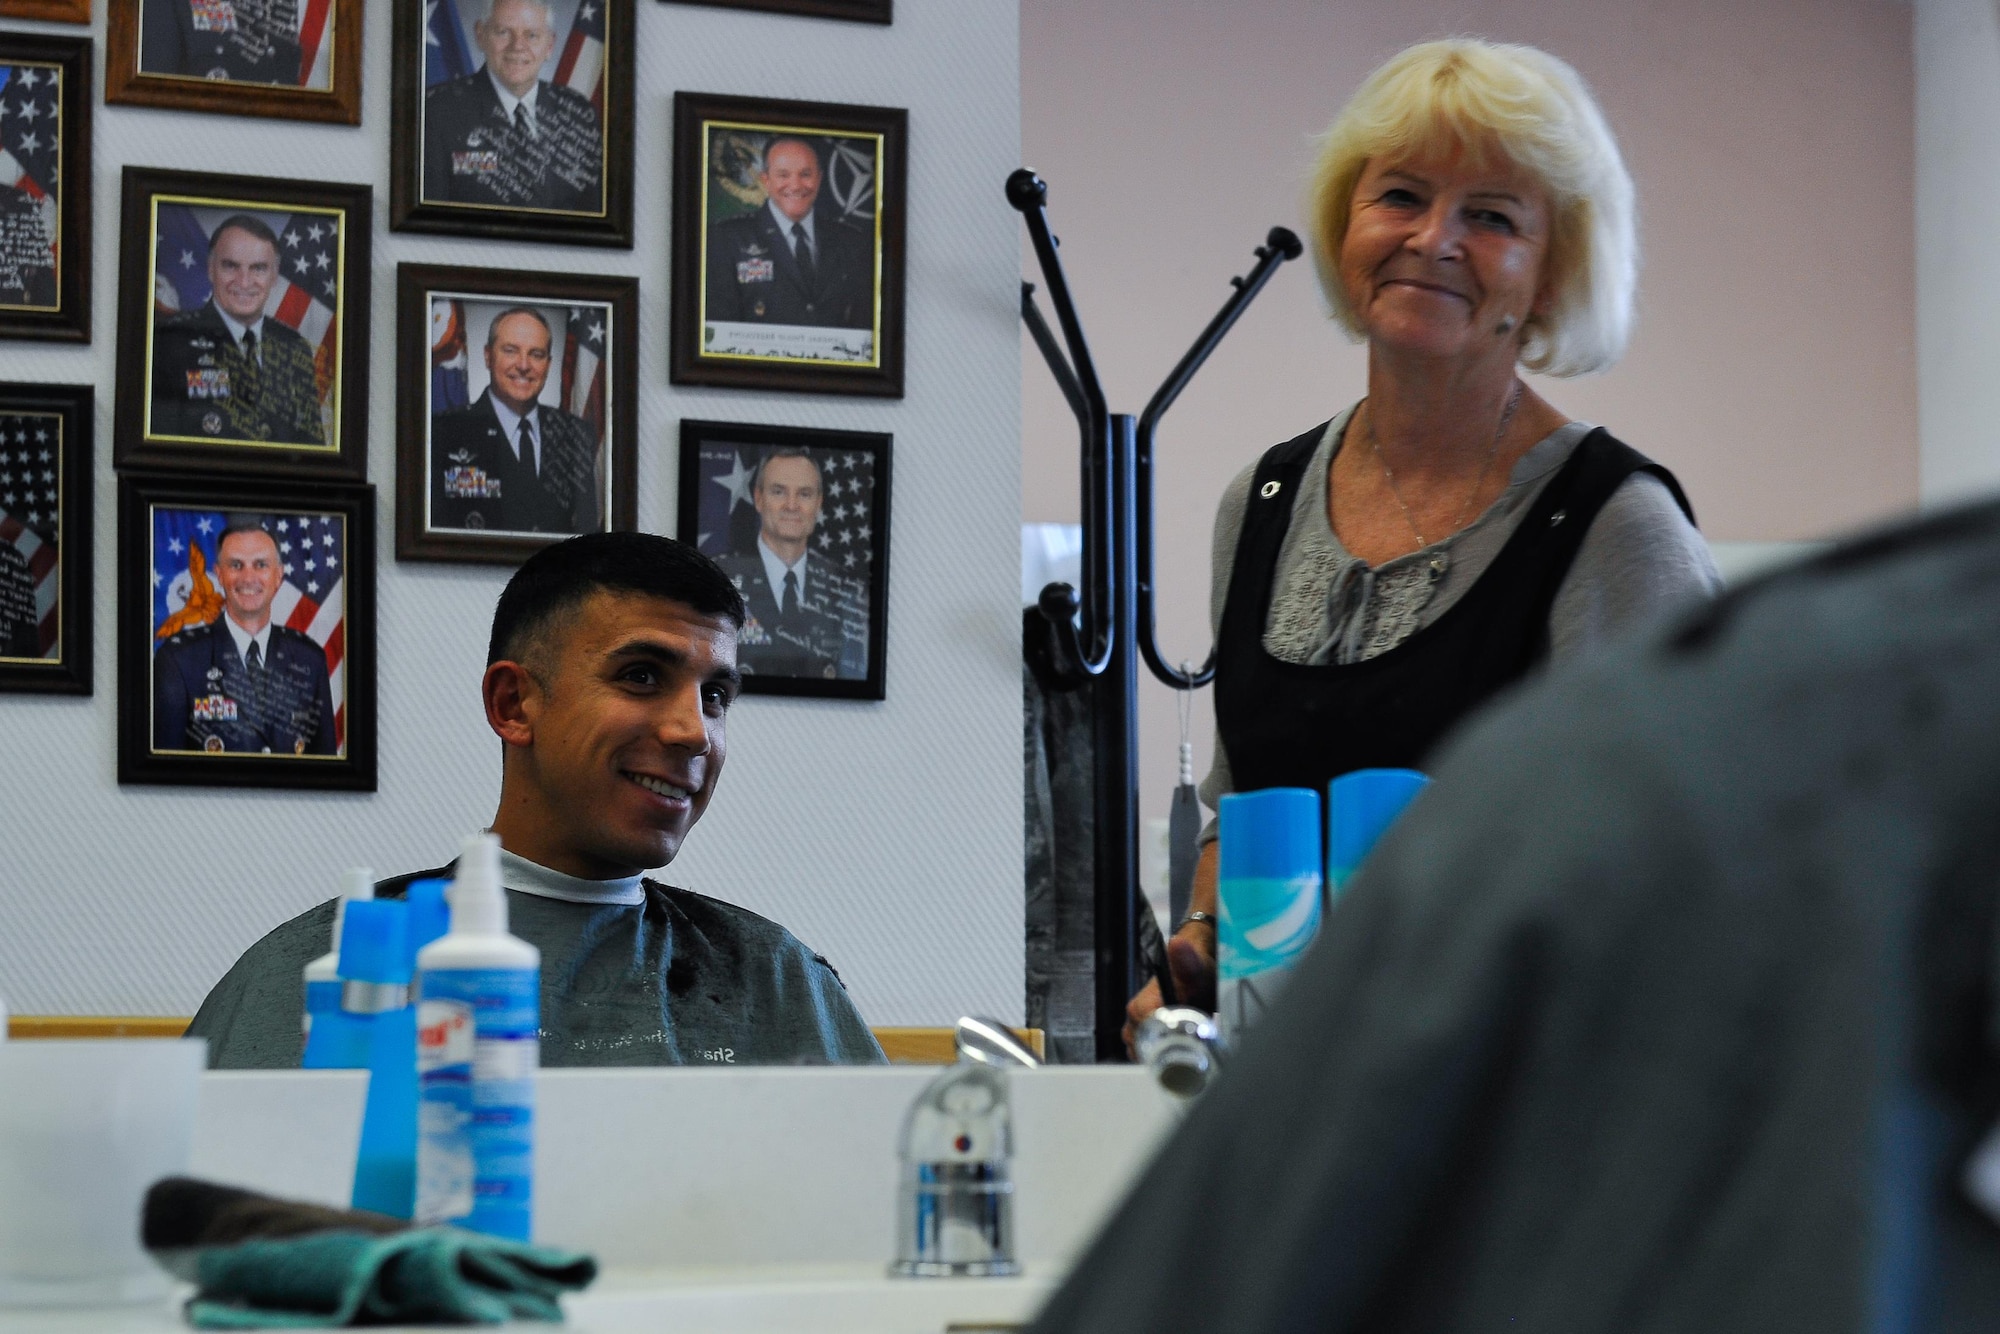 Claudia Gomez, barber, shares a conversation with her customer, Airman 1st Class Hector Montoya, 721st Aerial Port Squadron passenger service agent, Sept. 20, 2016, at Ramstein Air Base, Germany. Gomez believes in recreating a “close to home” atmosphere with her shop, and enjoys getting to know the people that come in and helping them feel comfortable. (U.S. Air Force photo/Airman 1st Class Lane T. Plummer)